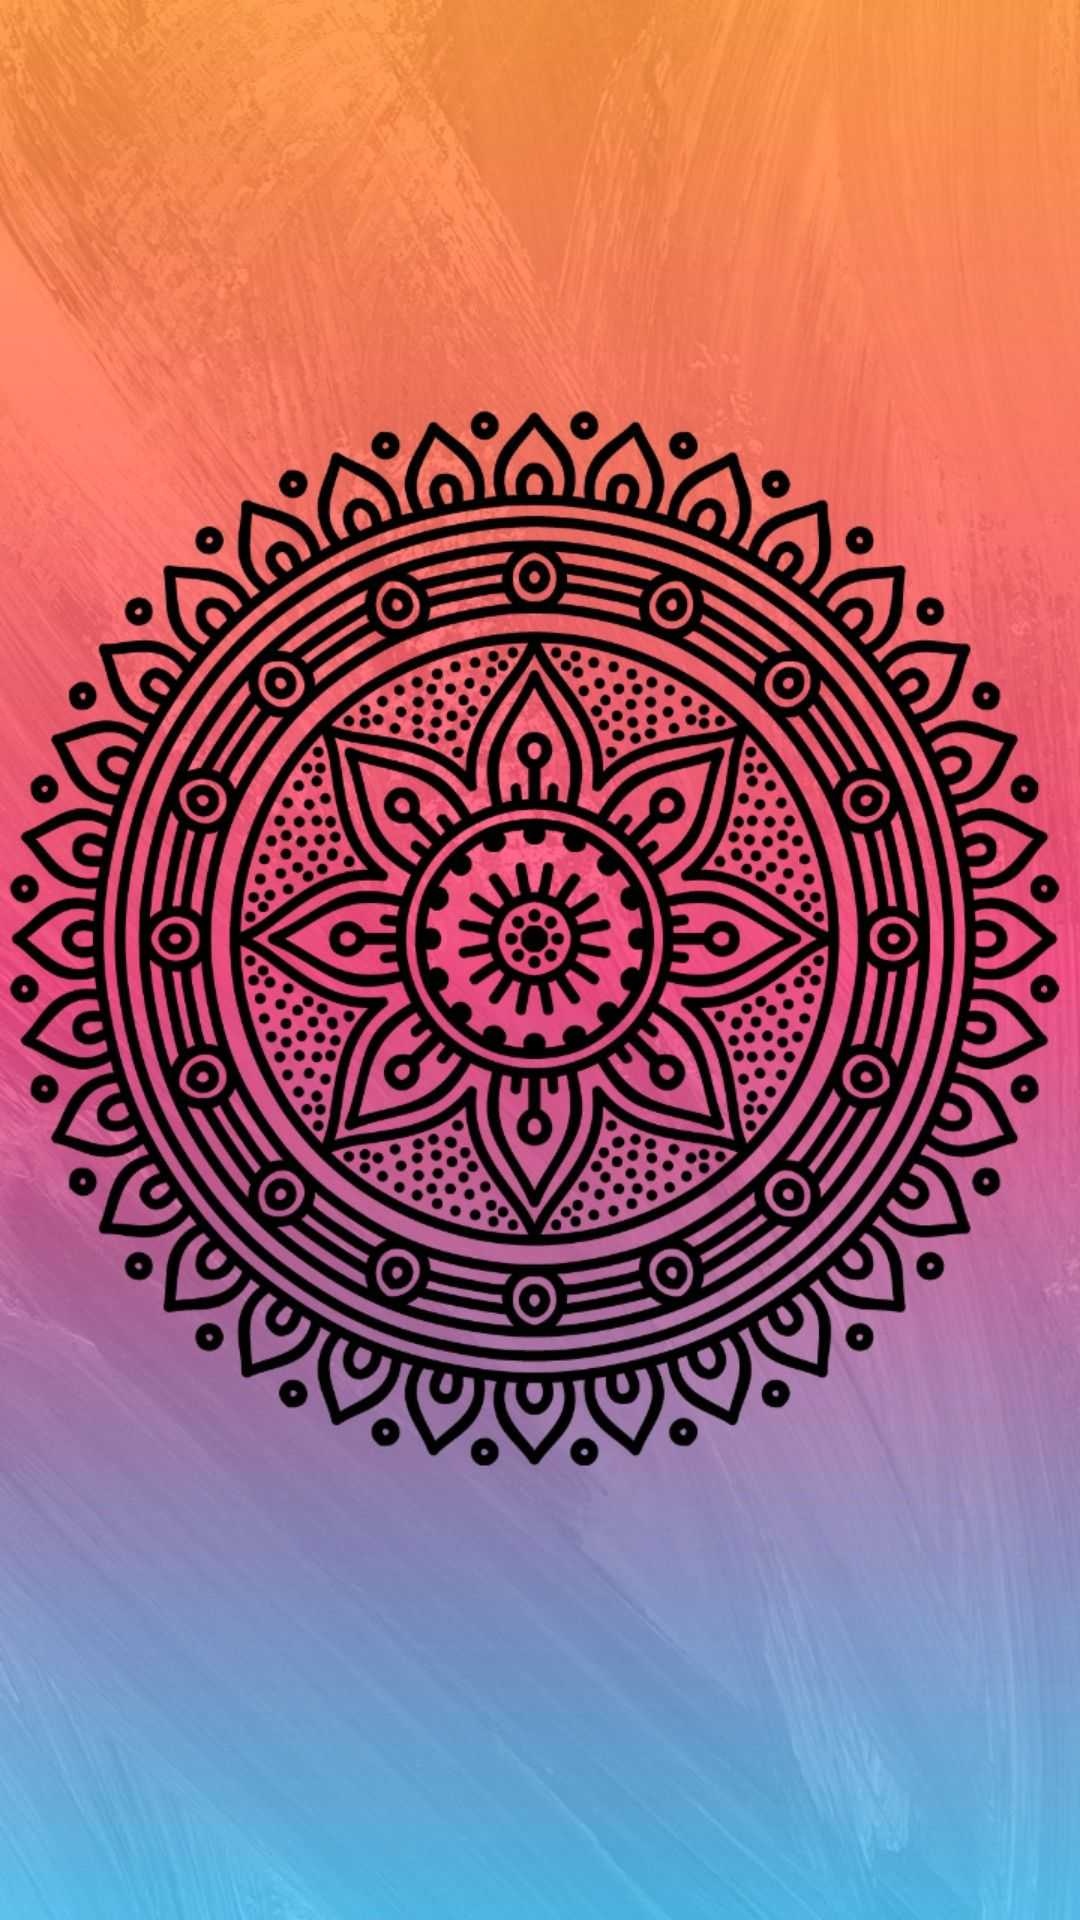 HD wallpaper, Free Spirited Expression, Psychedelic Vibes, Artistic Wallpaper, Iphone 1080P Hippie Background, Hippie Culture, 1080X1920 Full Hd Phone